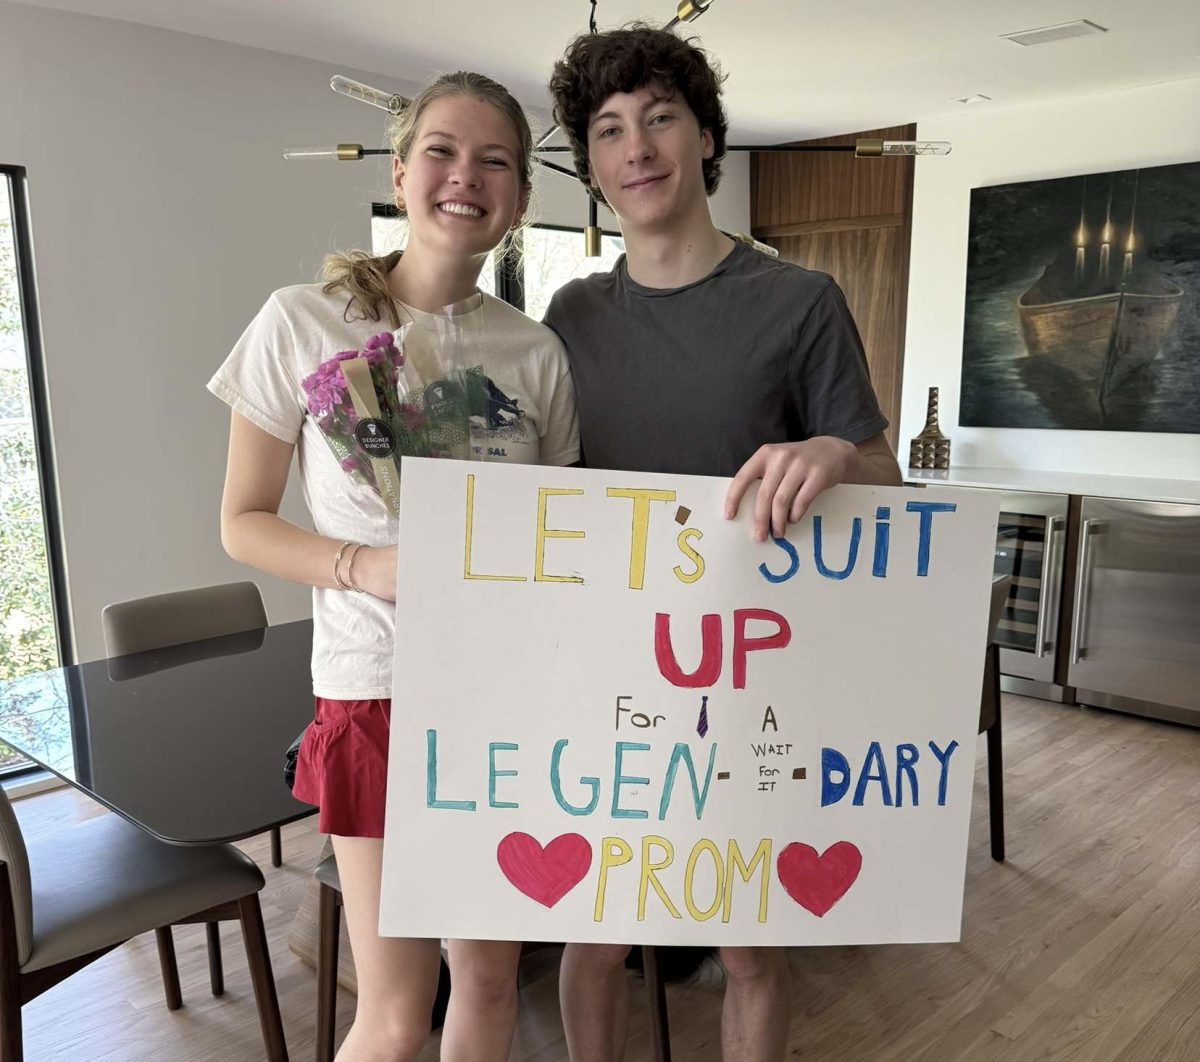 Junior Annie Neufeld and Senior Knox Wade suit up for a legendary prom!